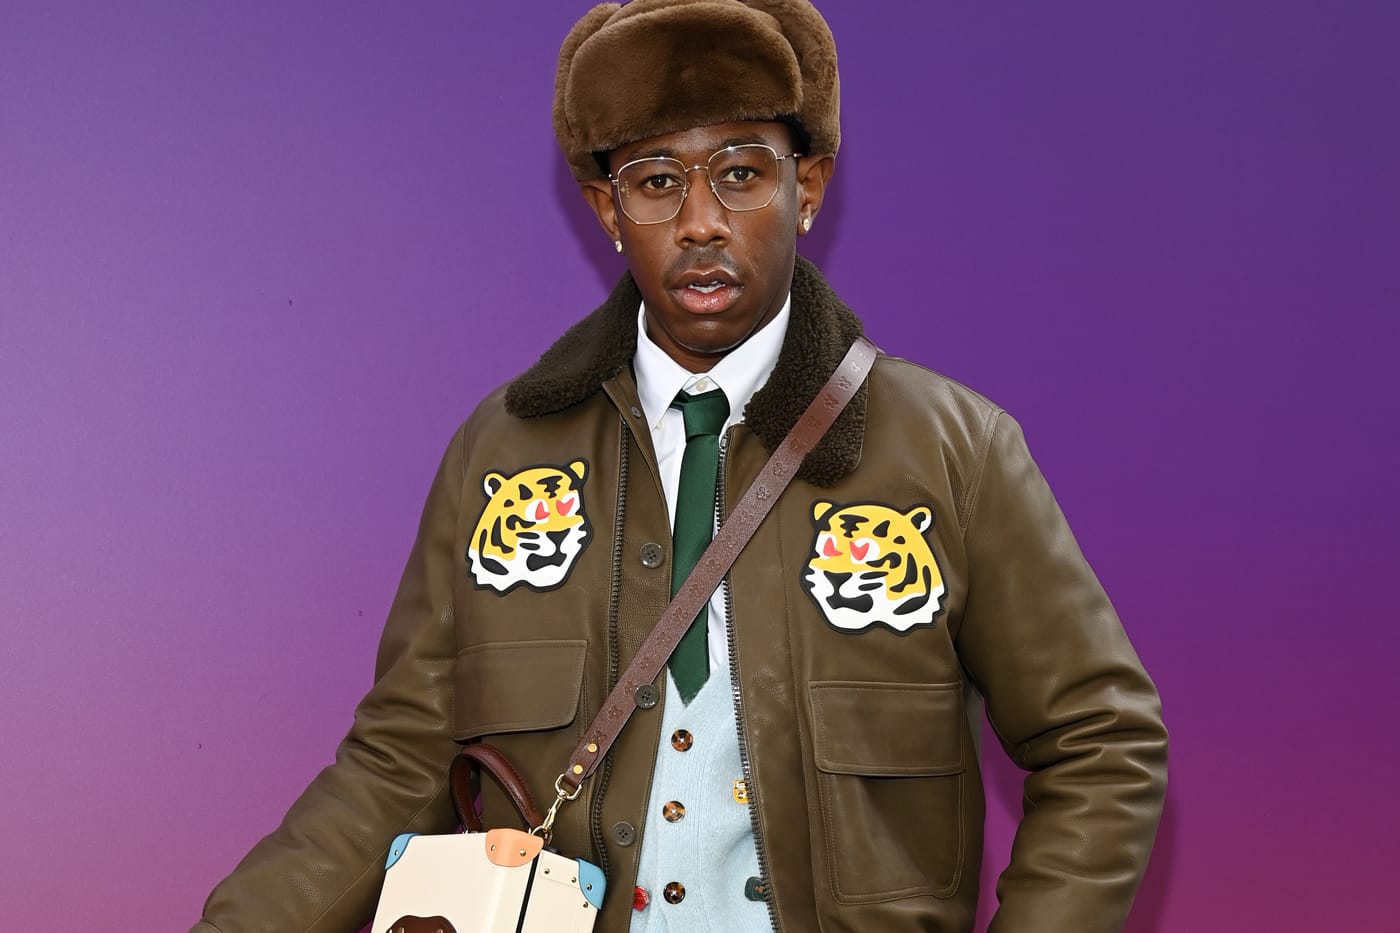 Tyler the Creator shines at the 2020 Grammys